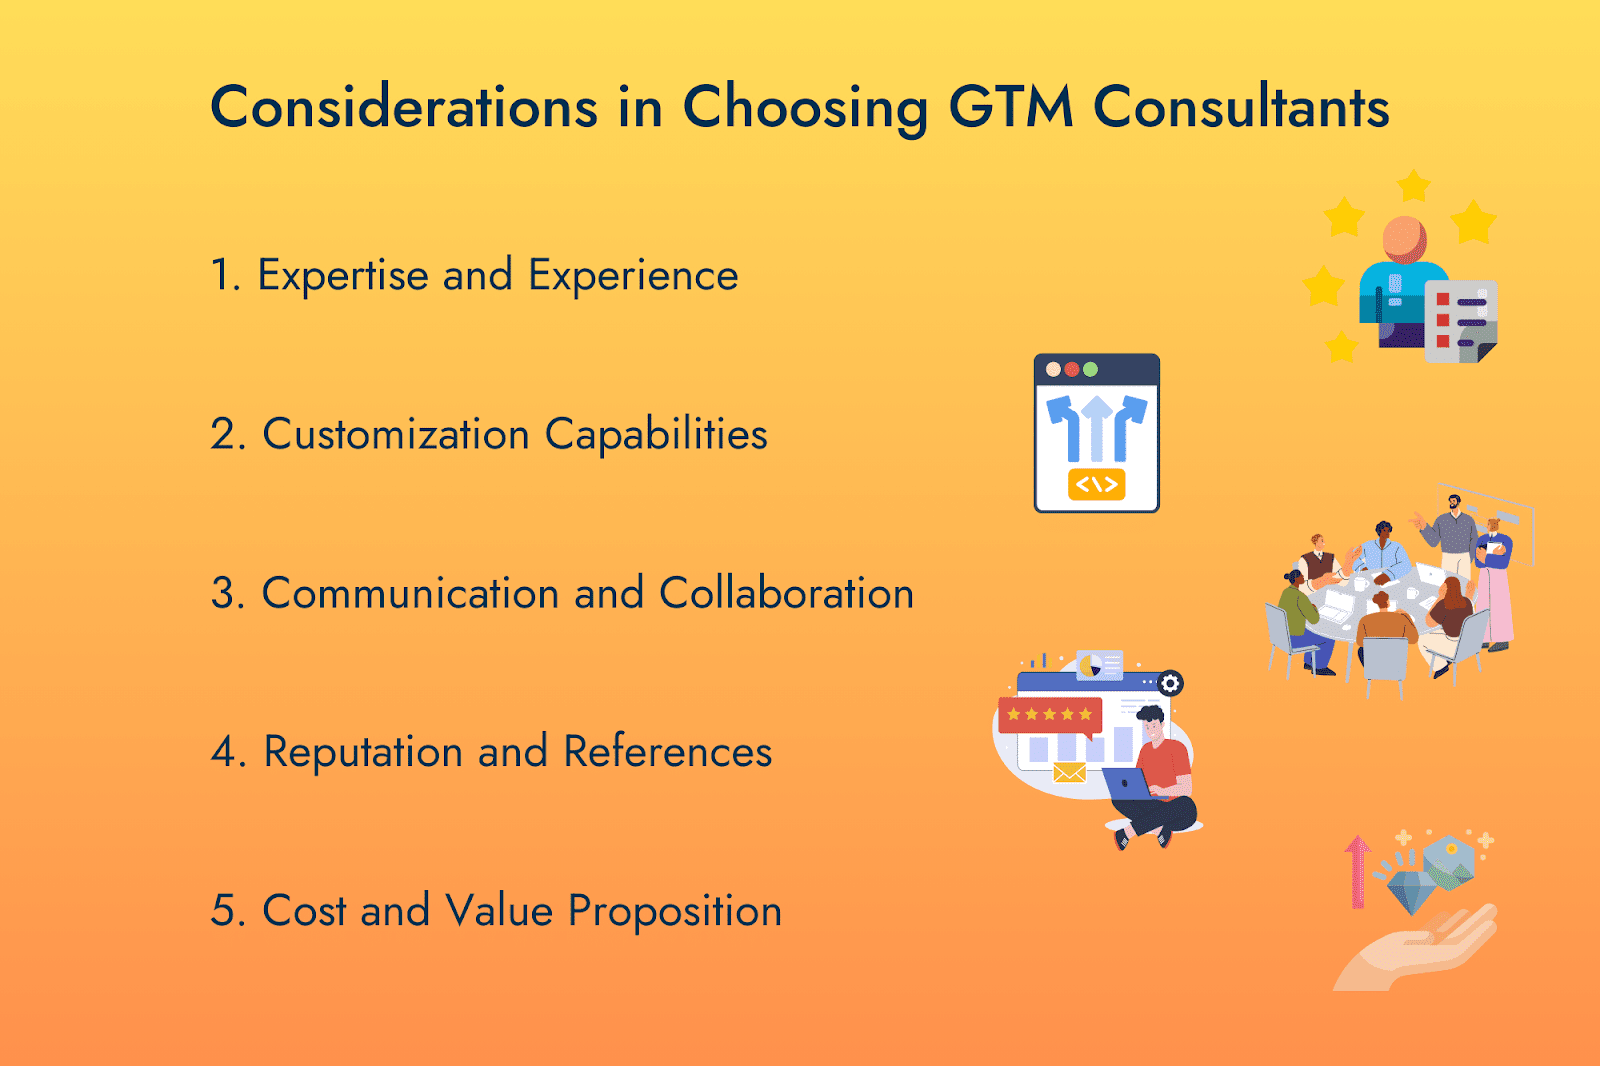 Considerations for Choosing GTM Consultants